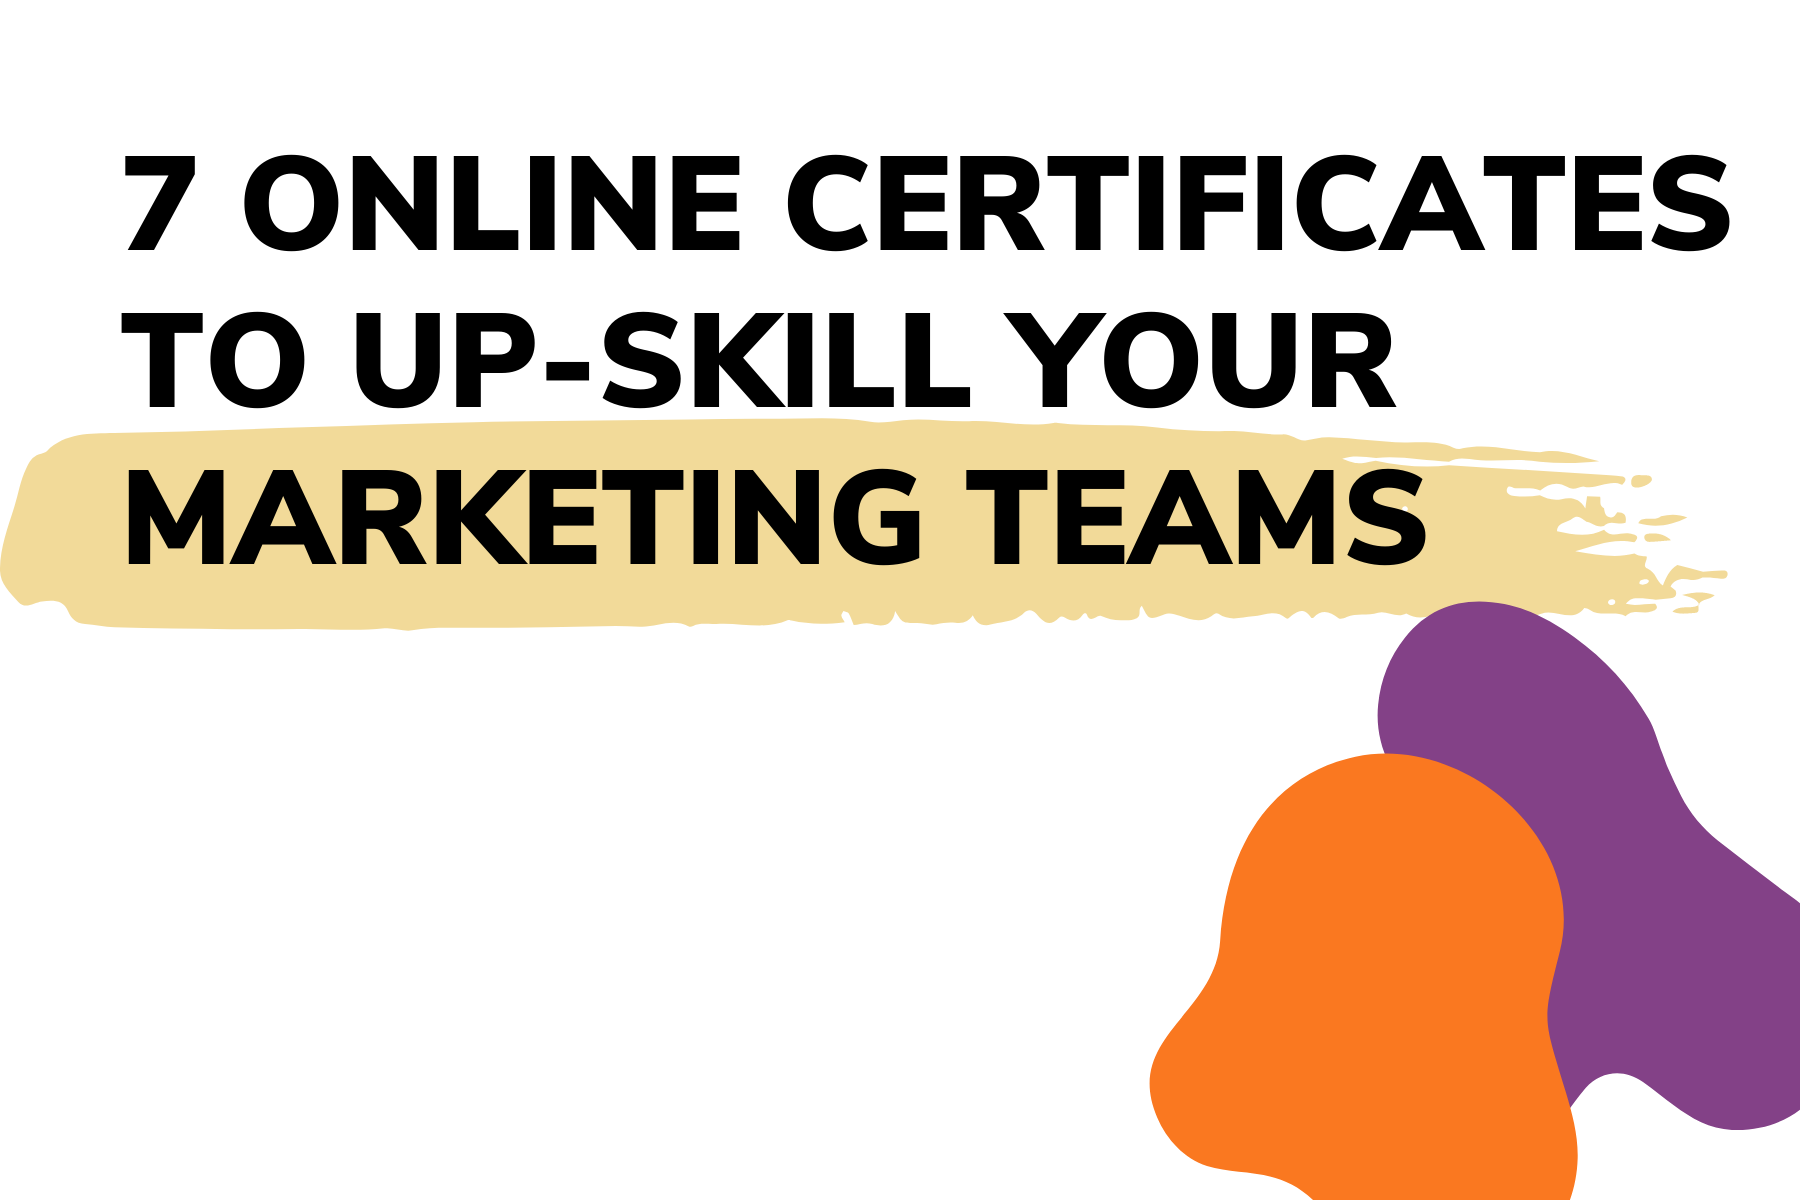 Our top 7 online certificates to up-skill your marketing teams